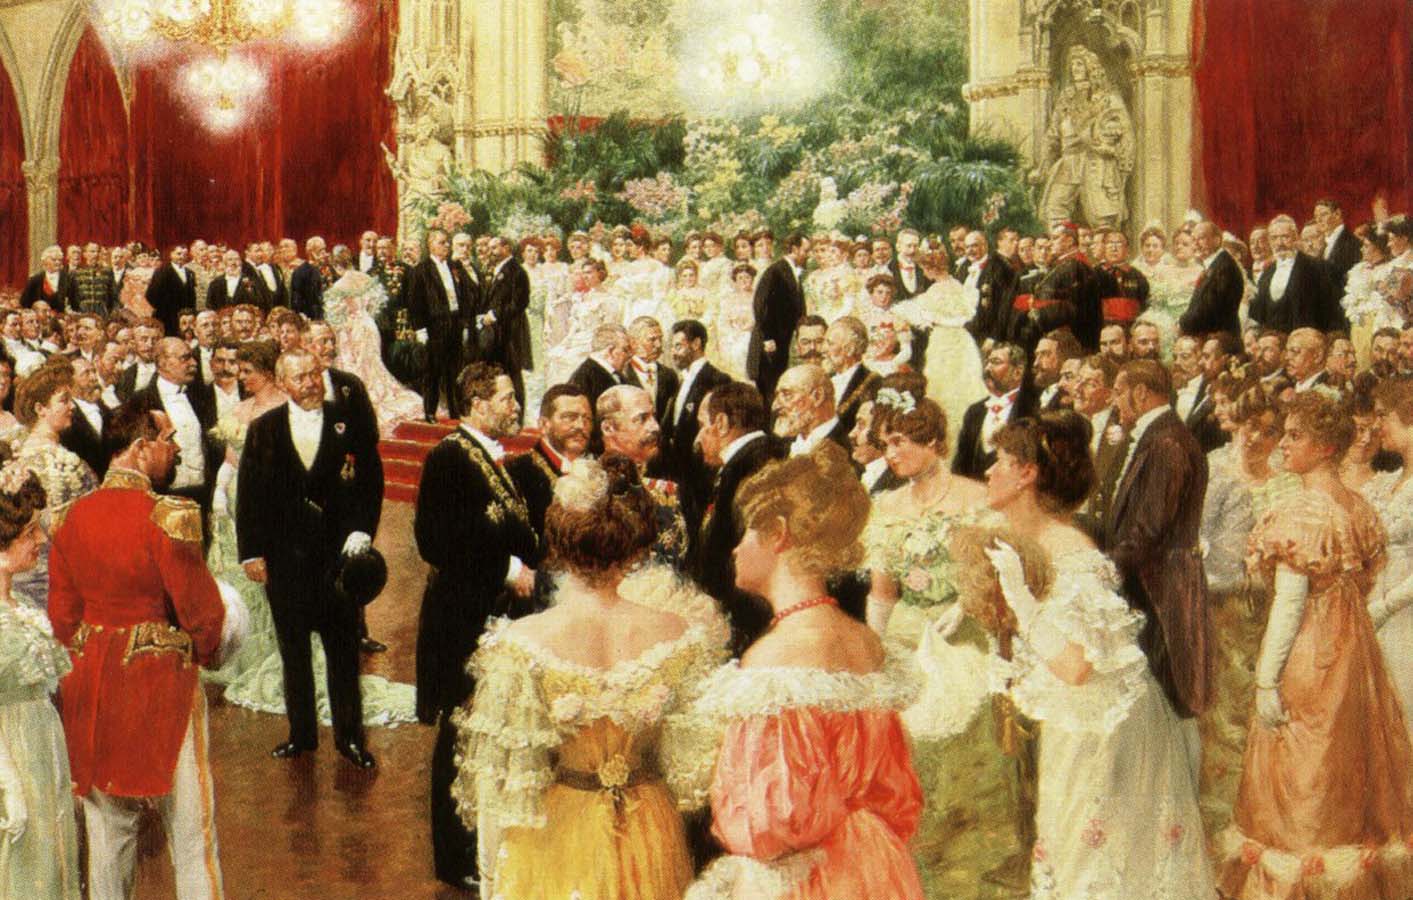 the dance music of the strauss family was the staple fare for such occasions